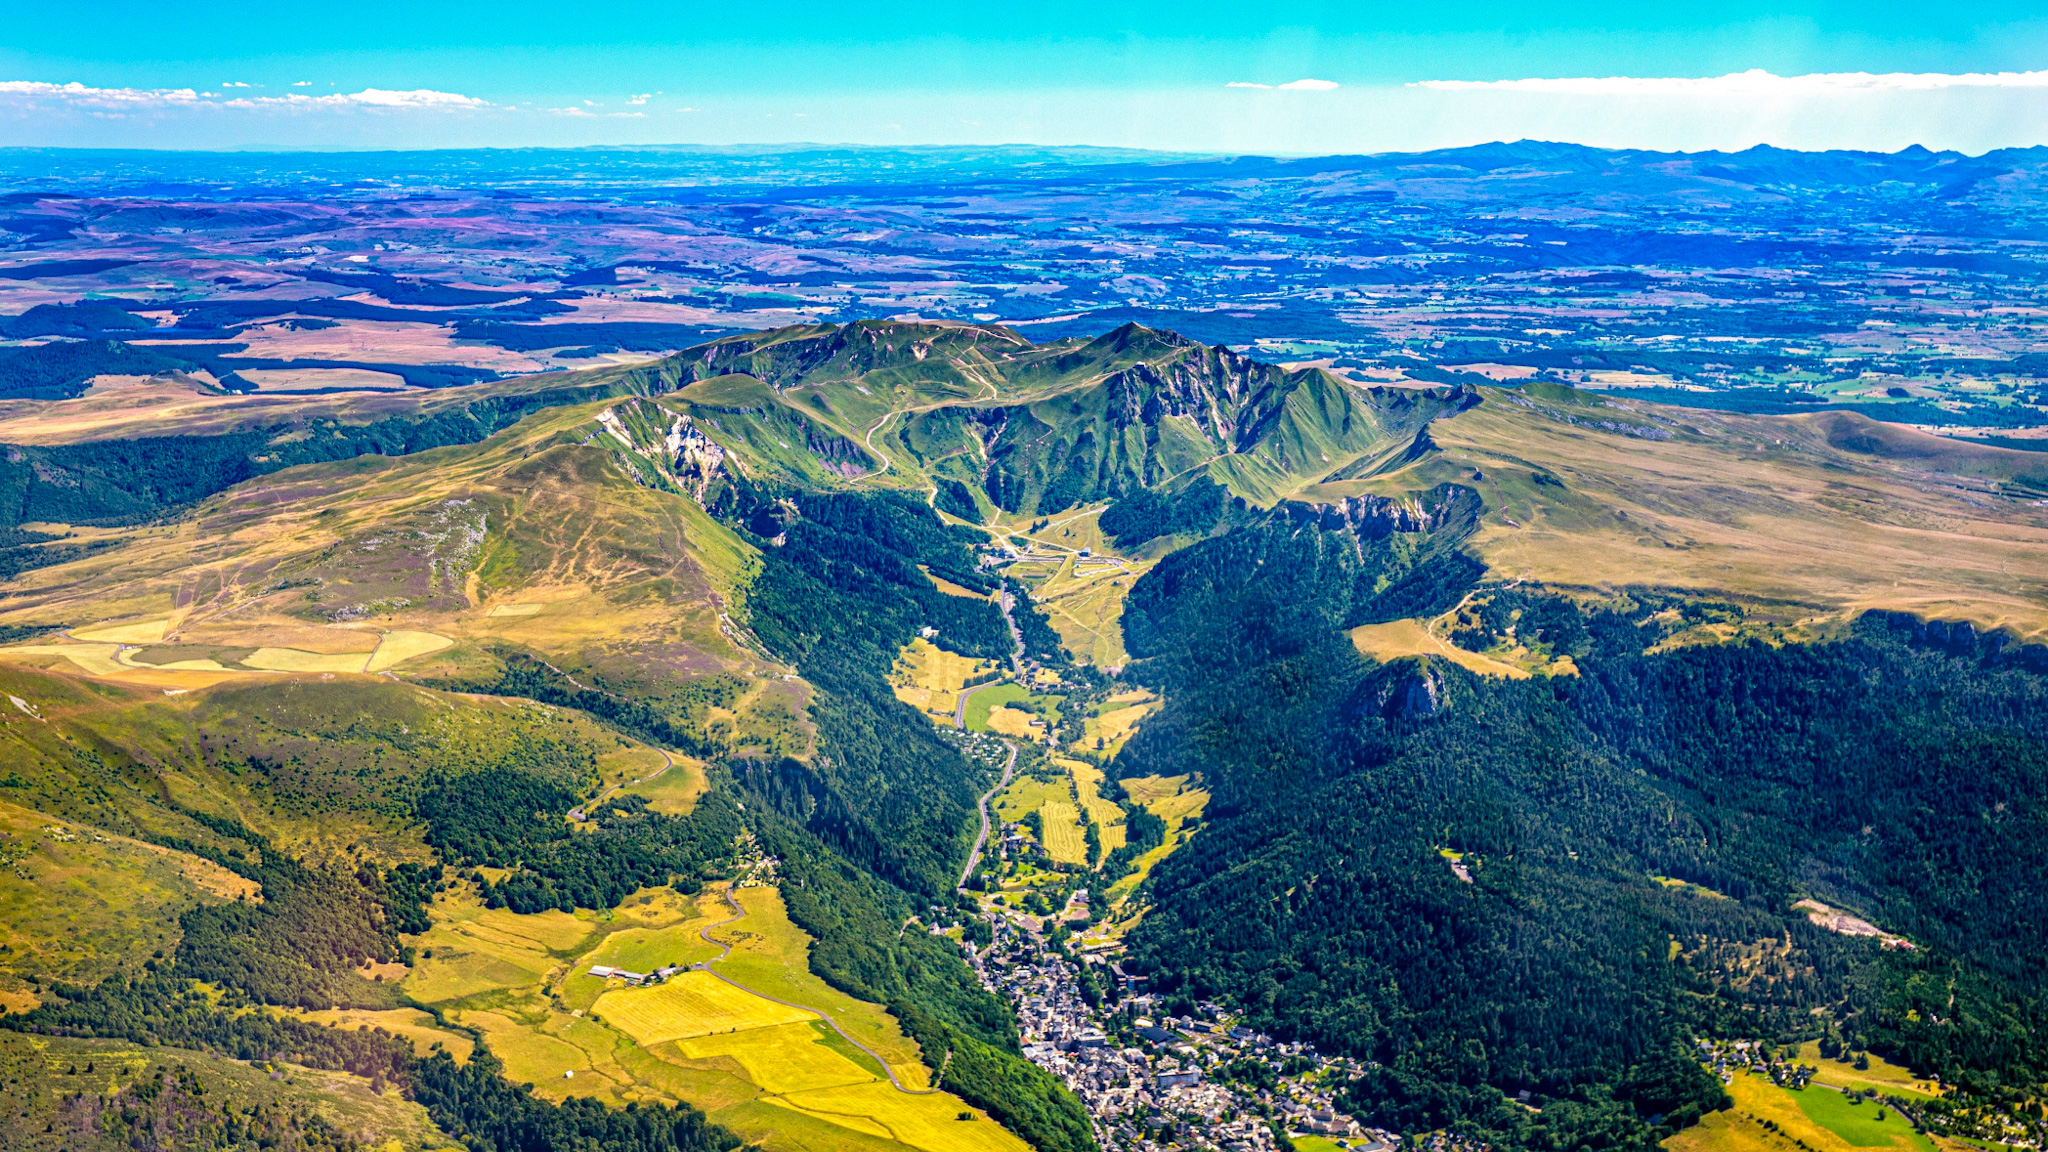 Monts Dores, from Puy de Sancy to Mont Dore and the Dordogne Valley